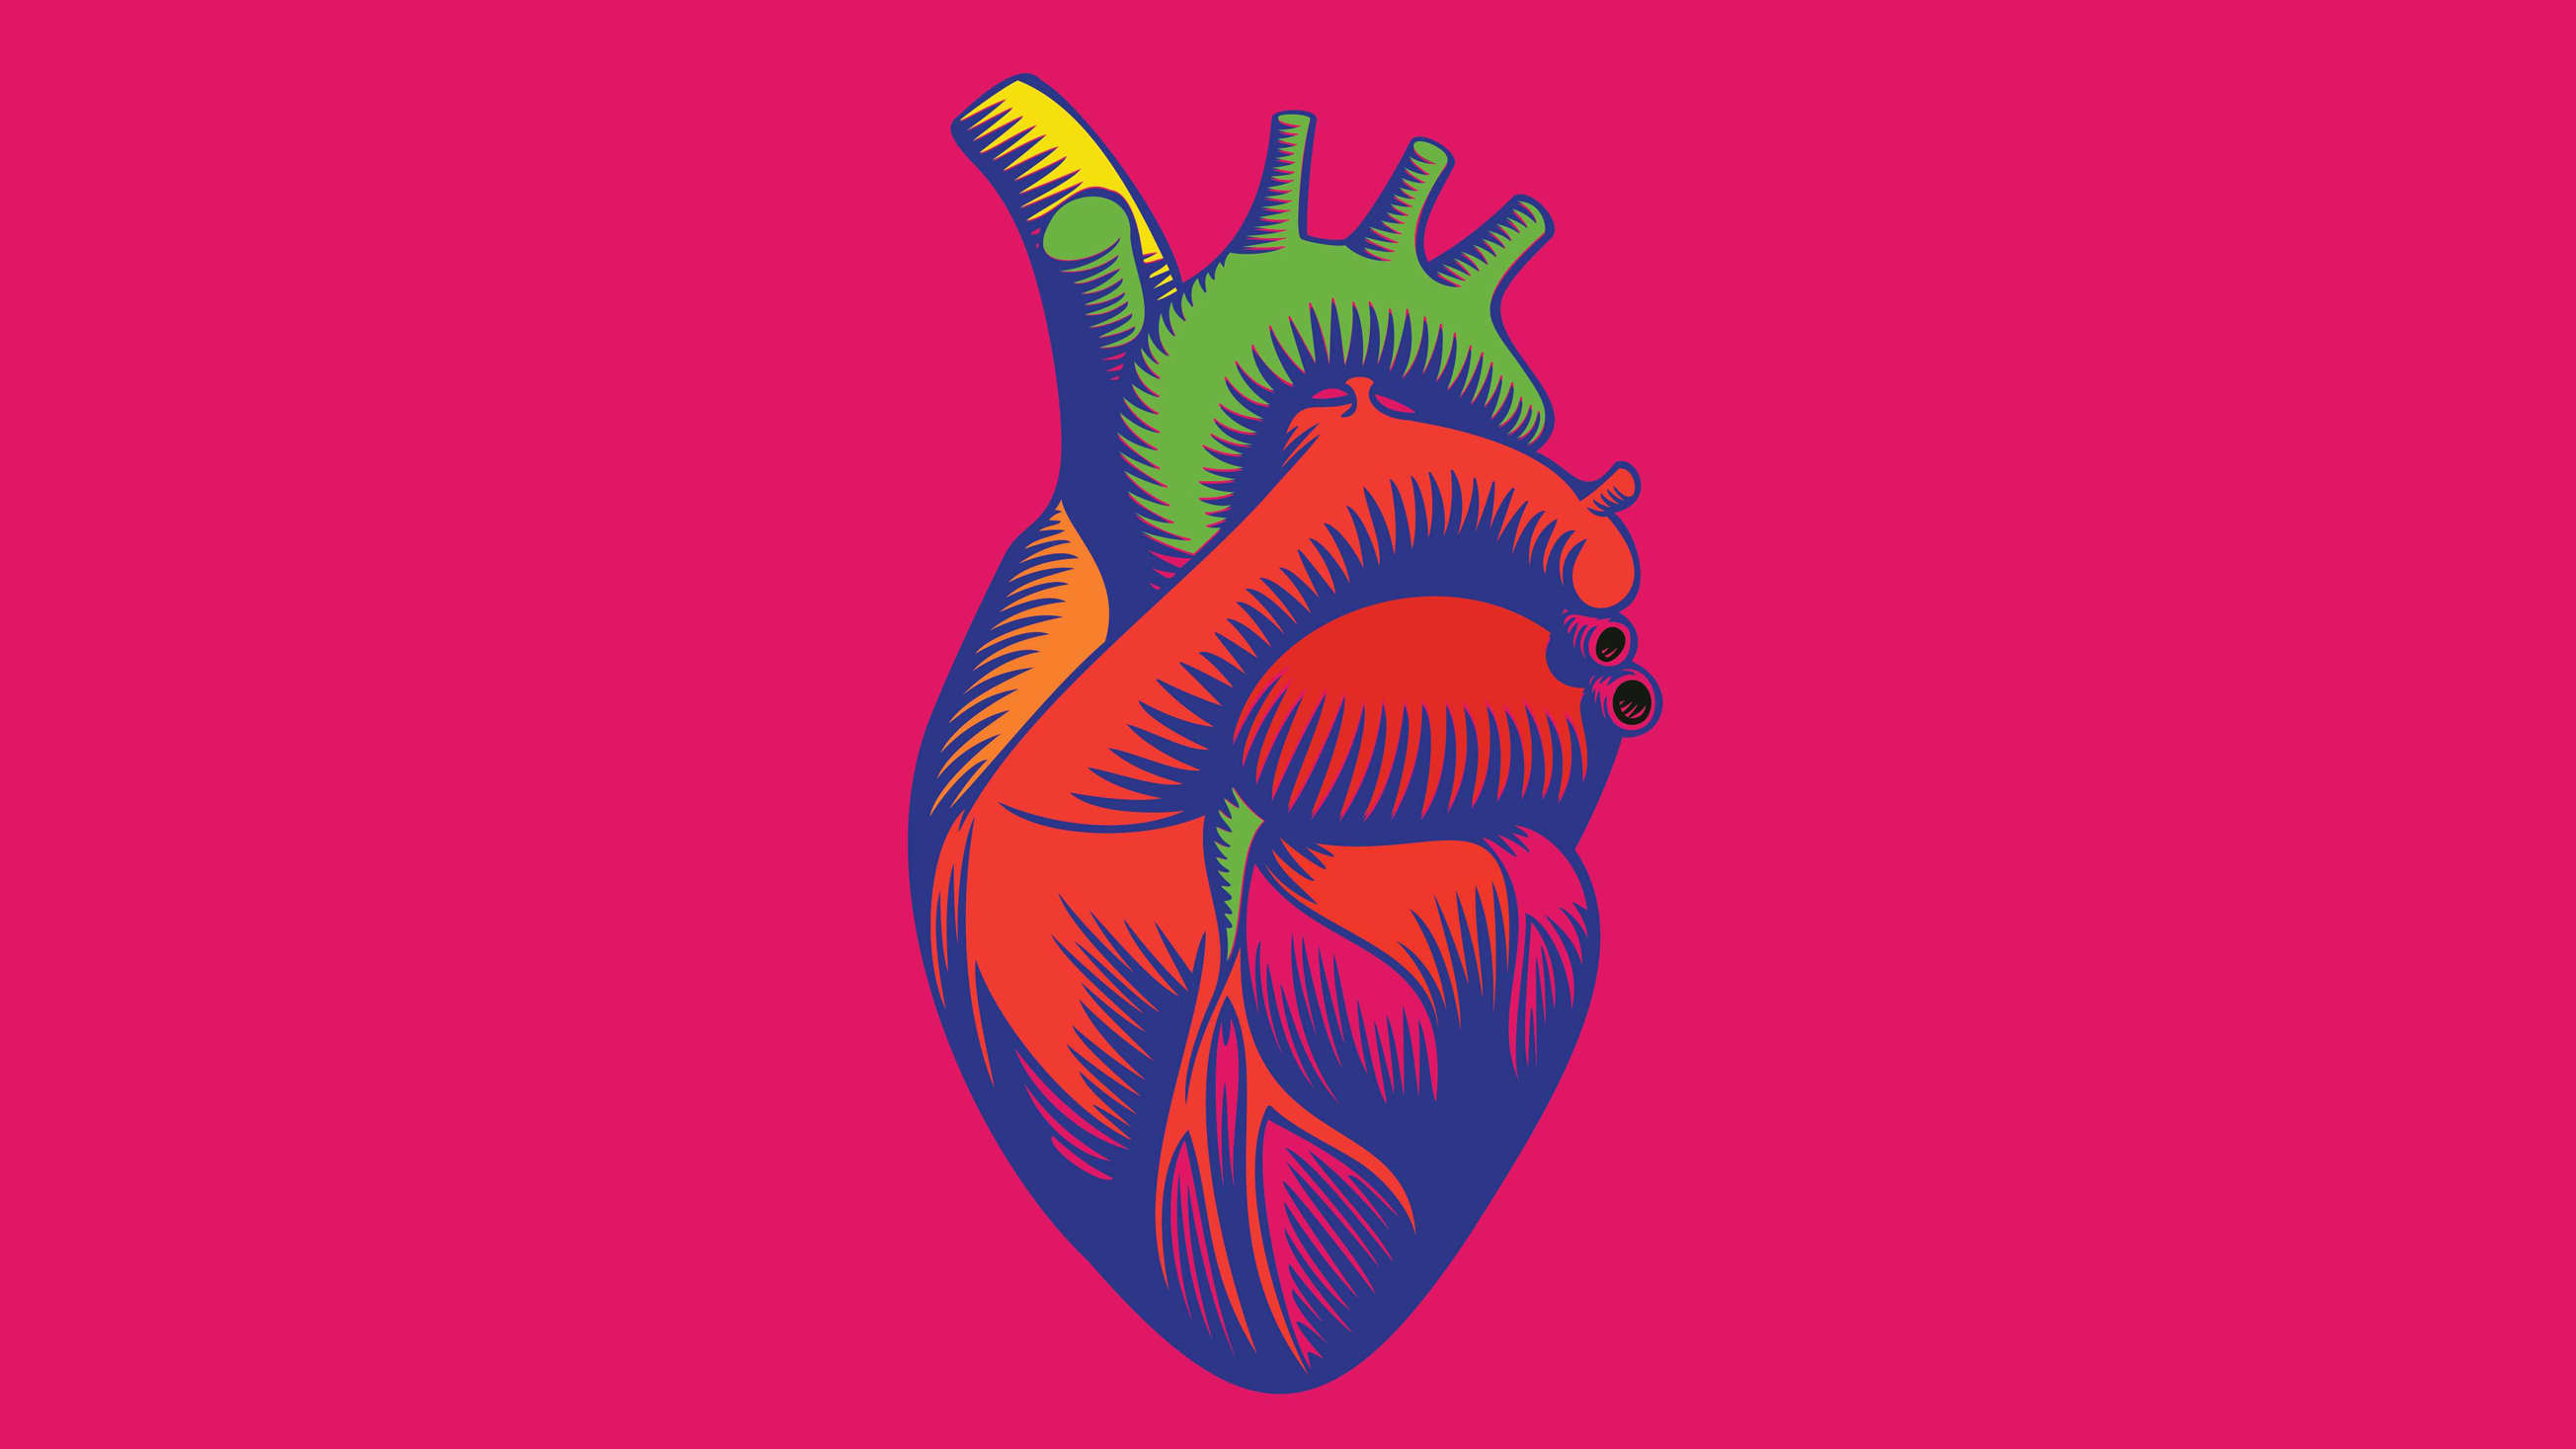 Anatomical illustration of a green and red heart on a bright pink background.